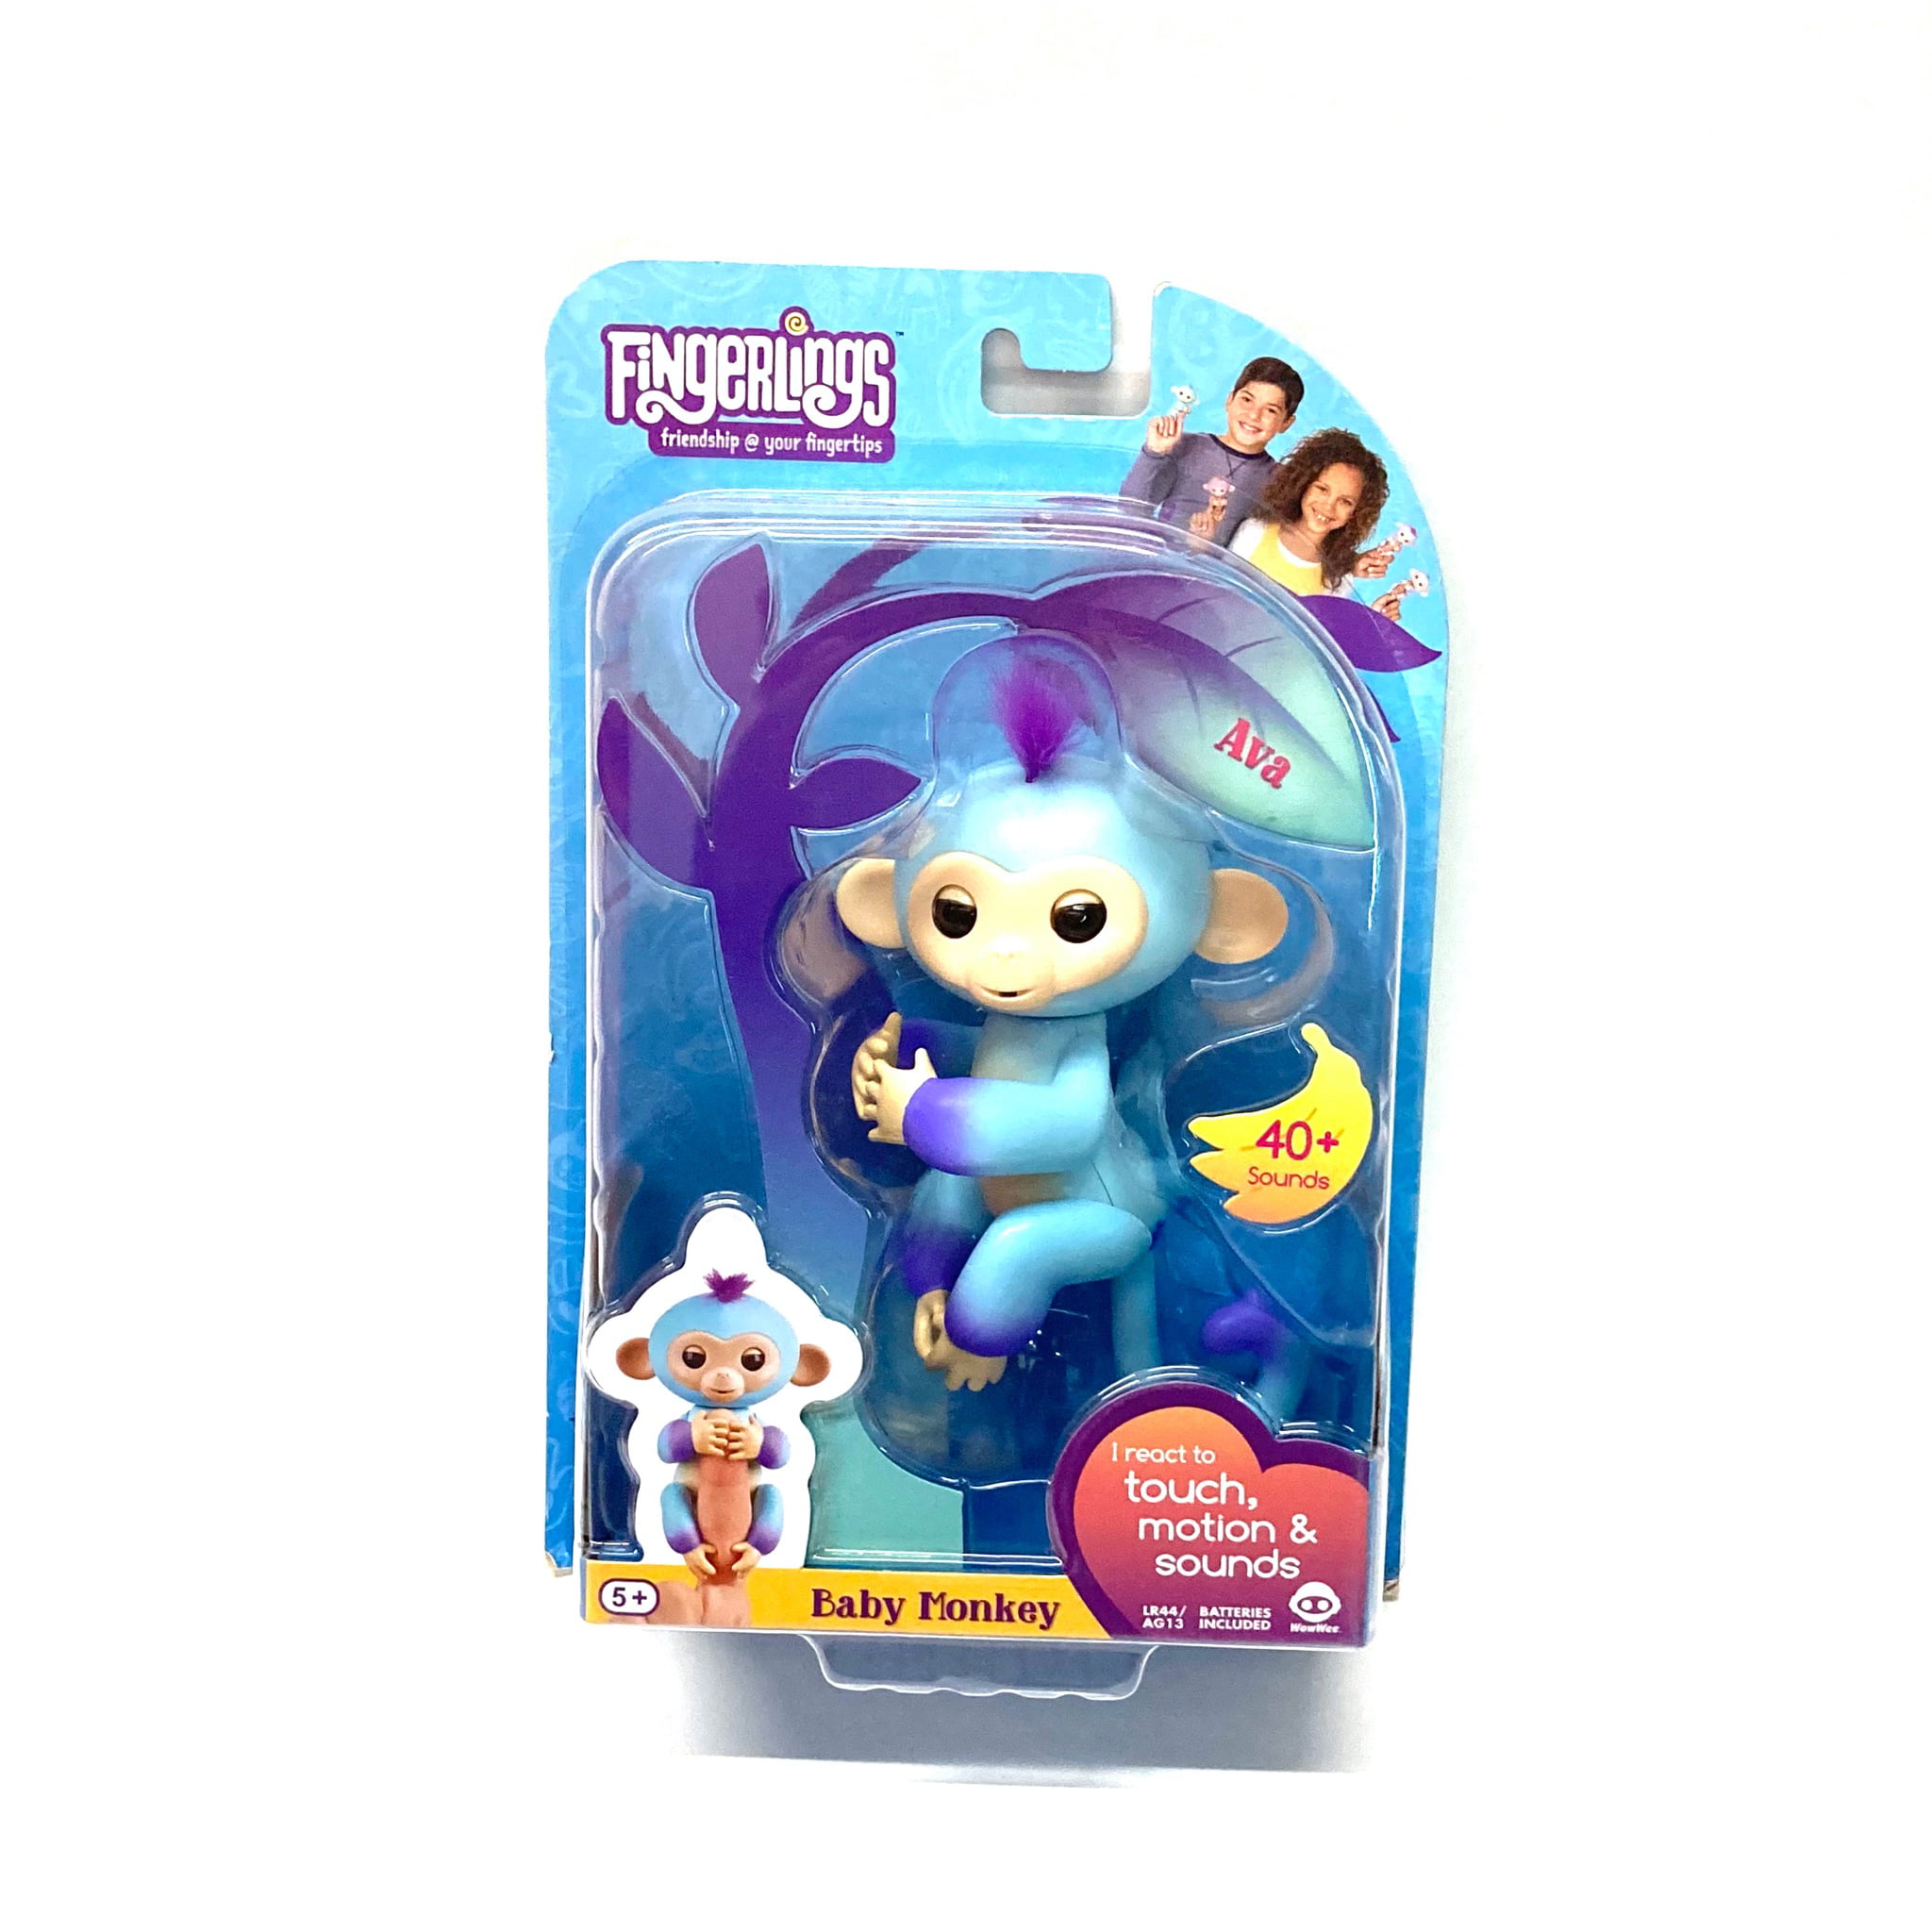 WowWee Fingerlings Zoe Baby Monkey Interactive Toy 100 Authentic Turquoise for sale online 